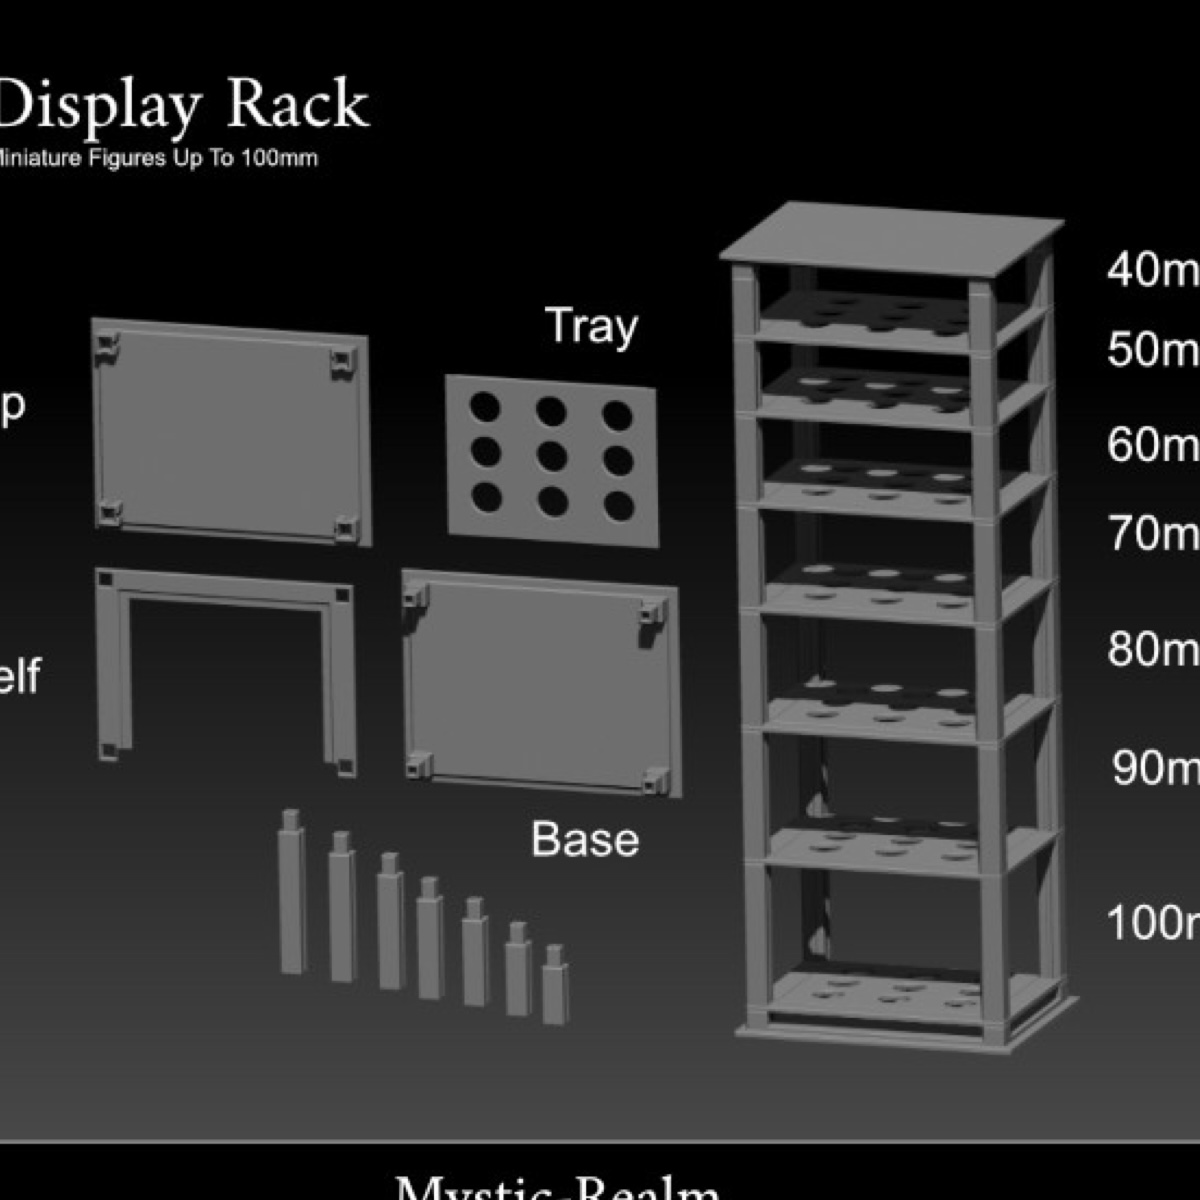 3D Printing for Unique Display Racks